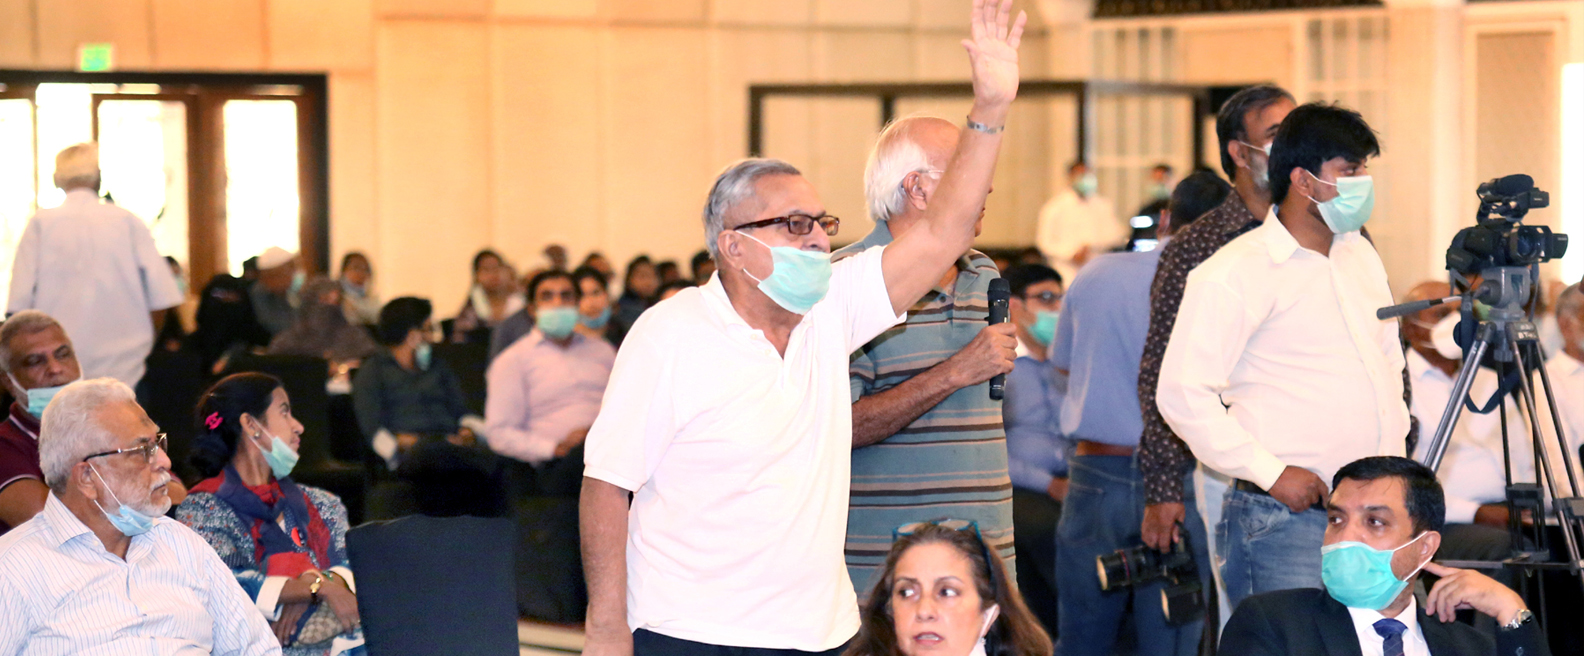 A shareholder raises hand during the question answer session at Annual General Meeting 2020 in Karachi